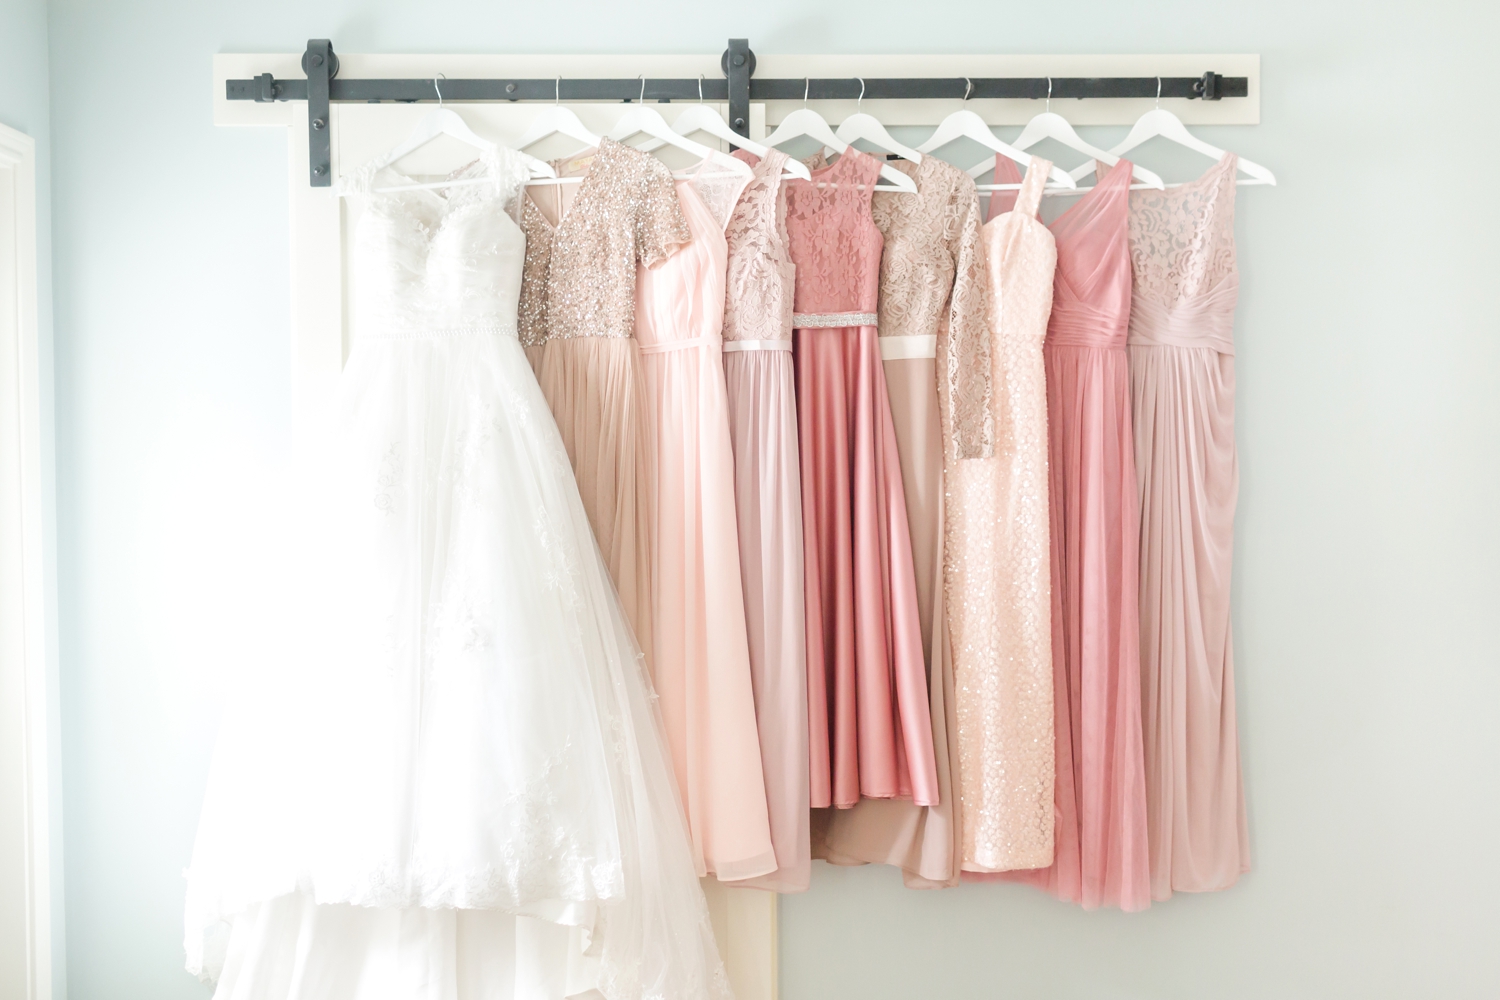  In love with these dresses! 